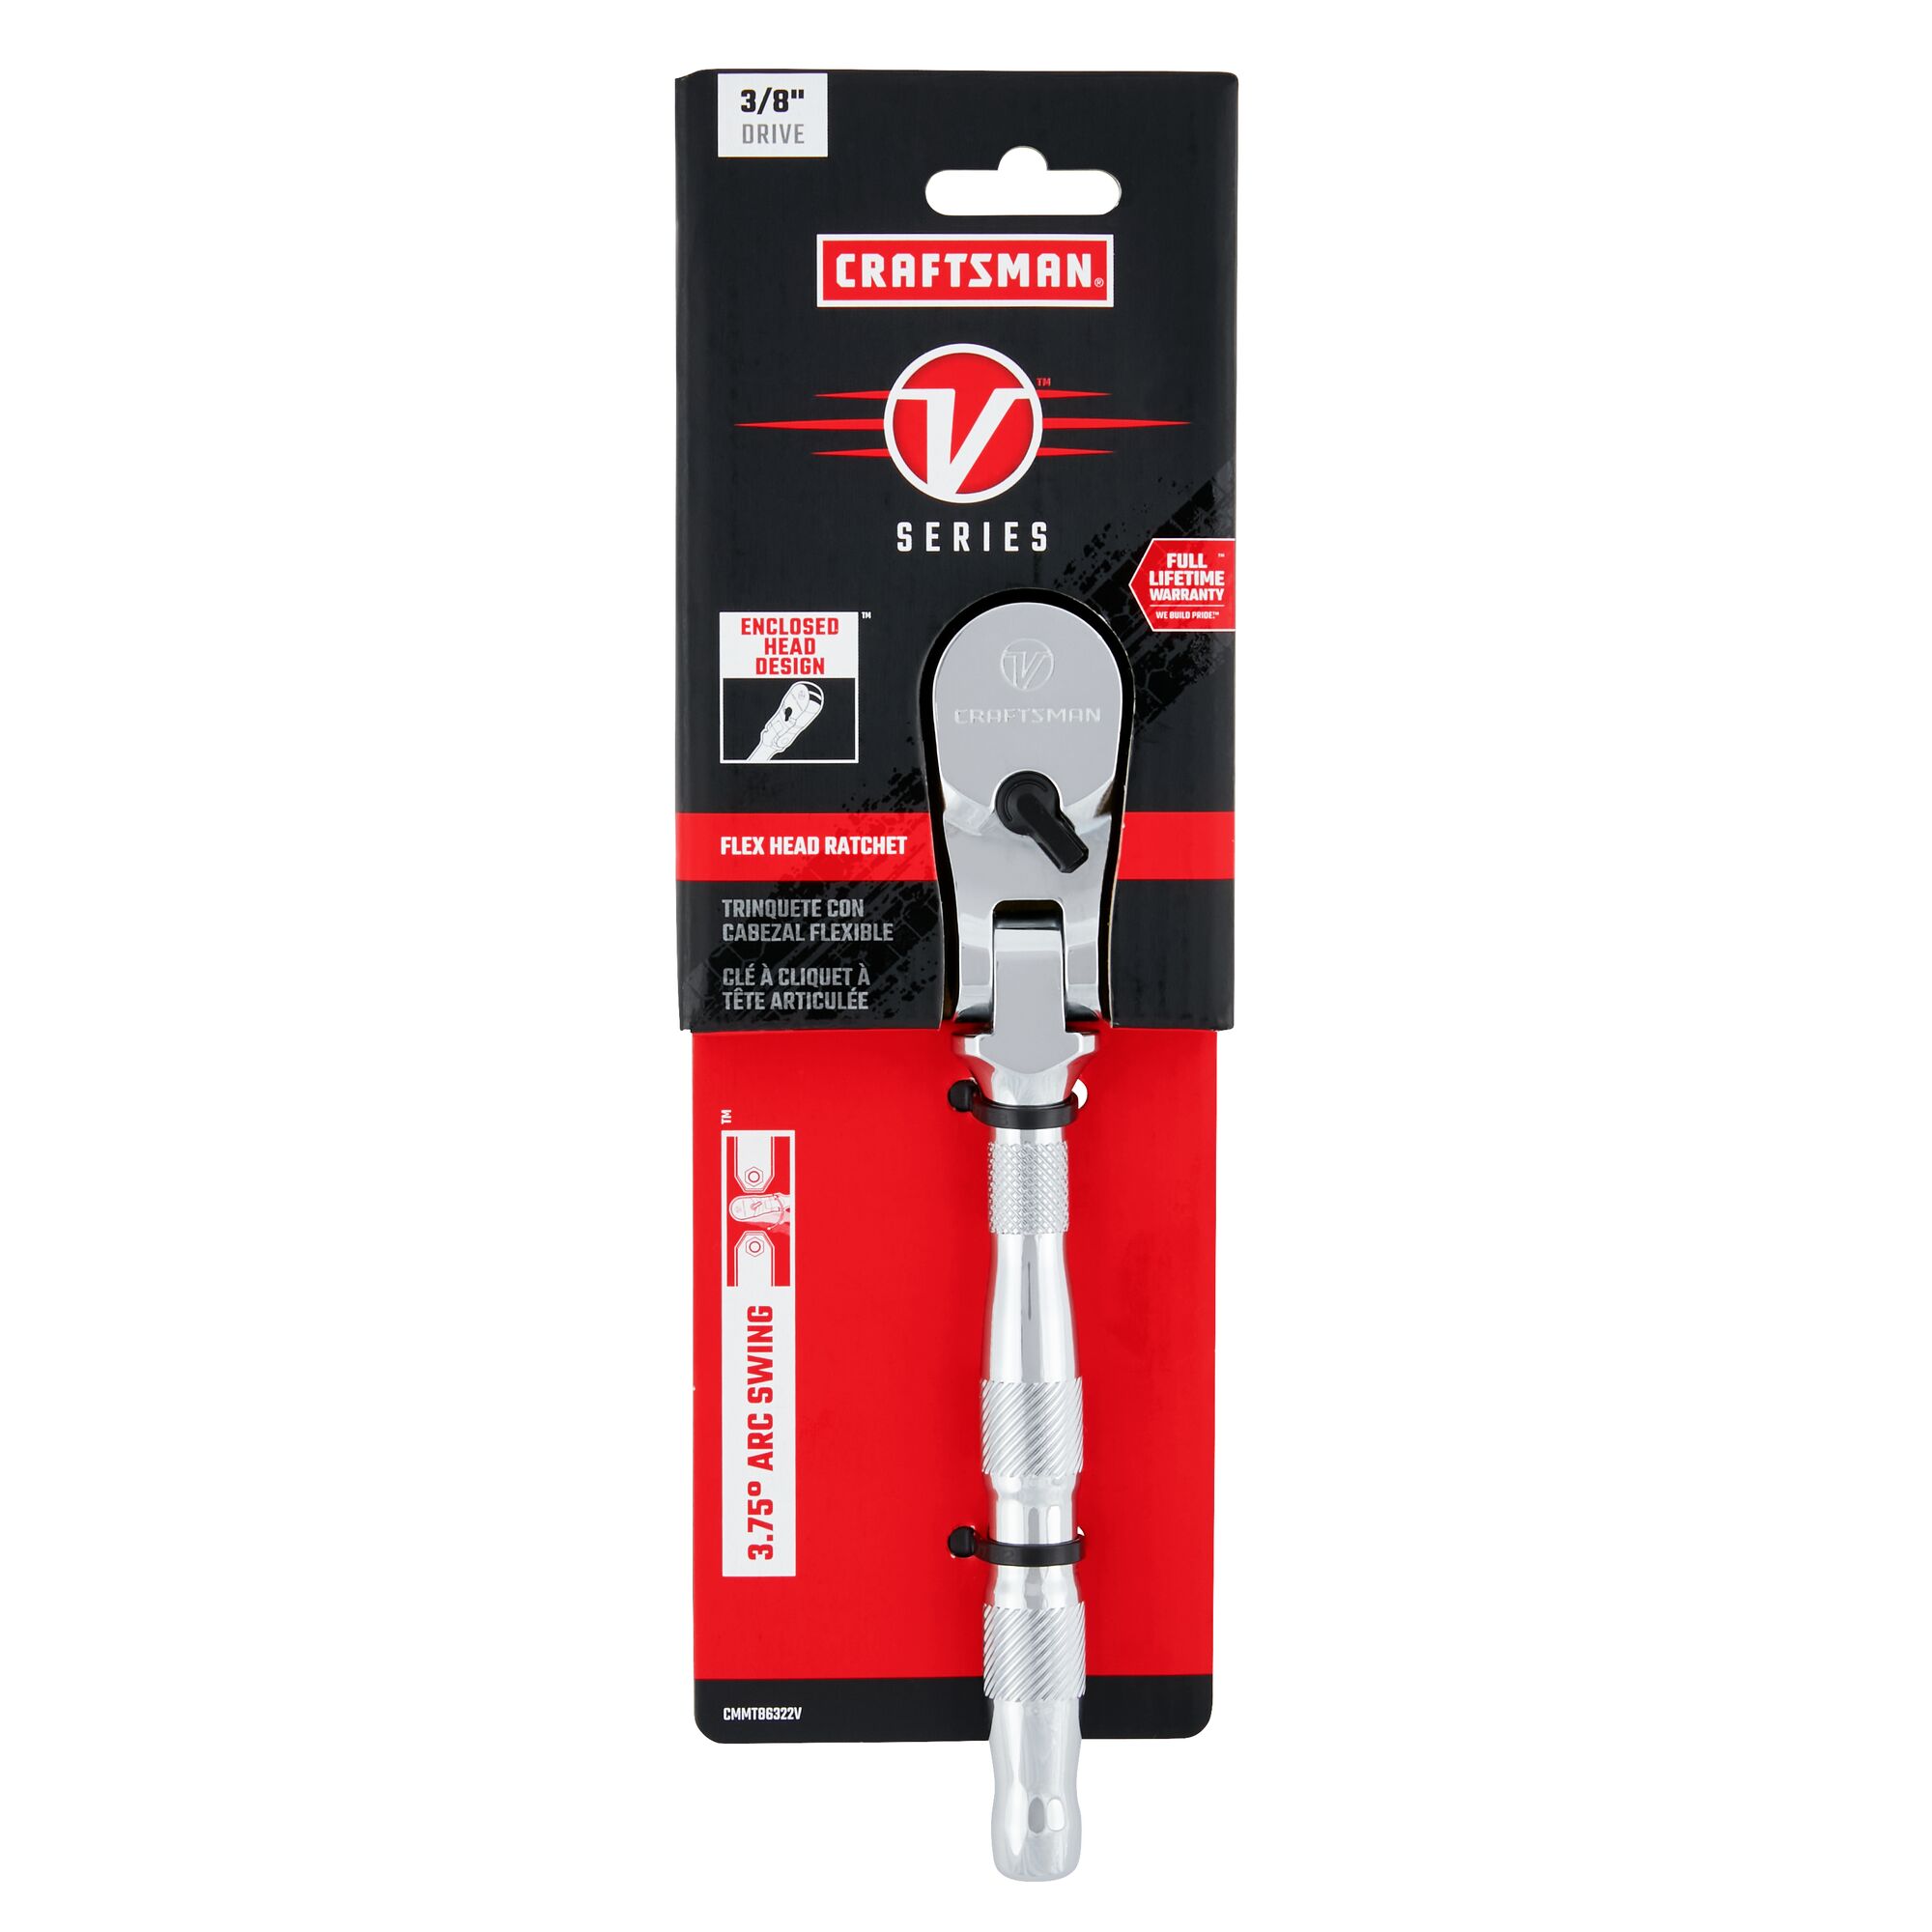 V series three eighth inch drive flex head ratchet in packaging.